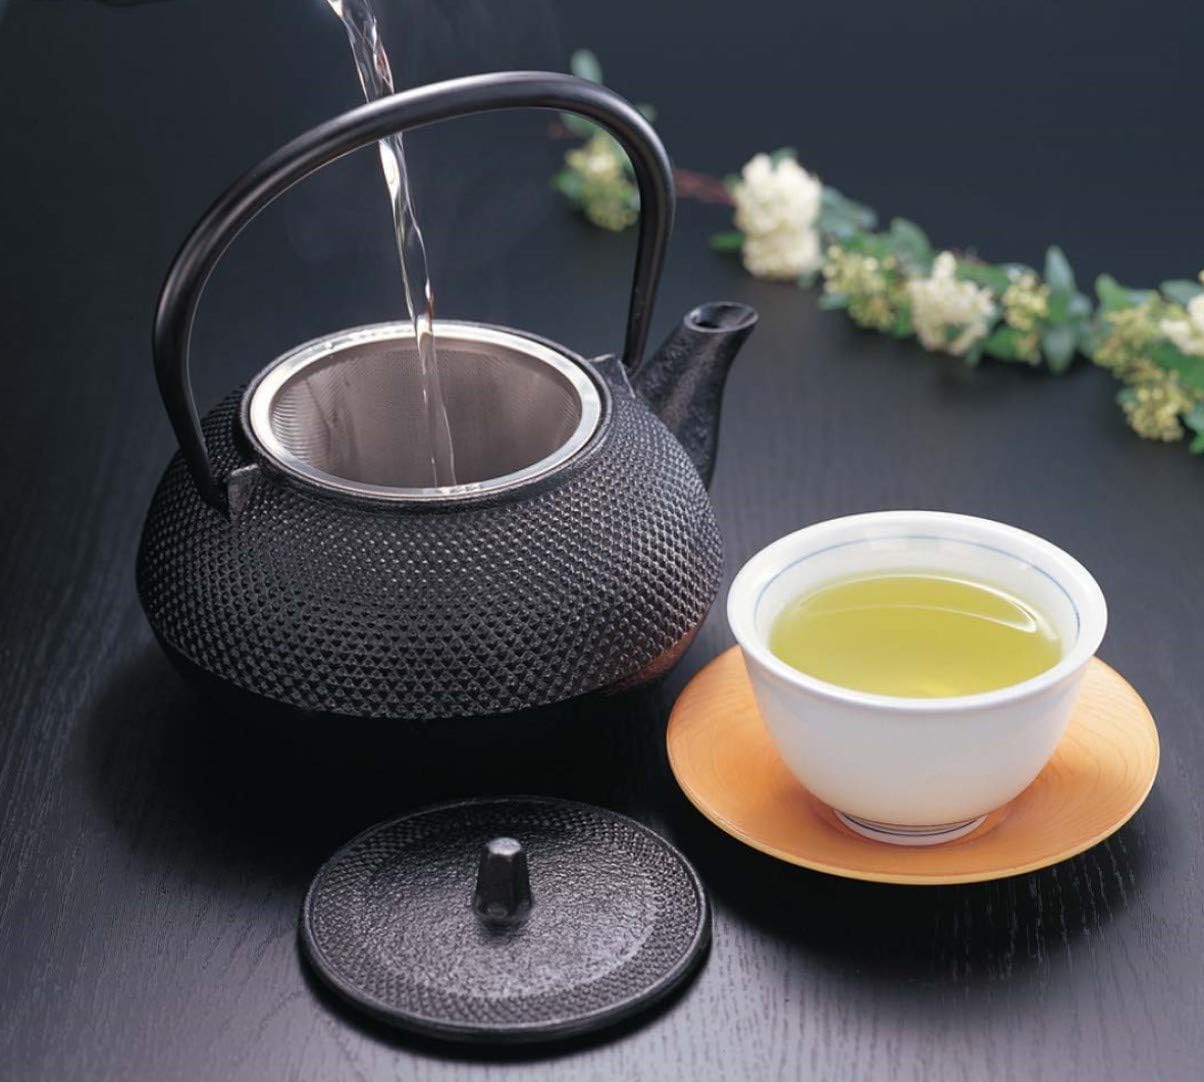 LMA Oriental Ceramic Tea Pot with Stainless Steel Infuser - 1 L